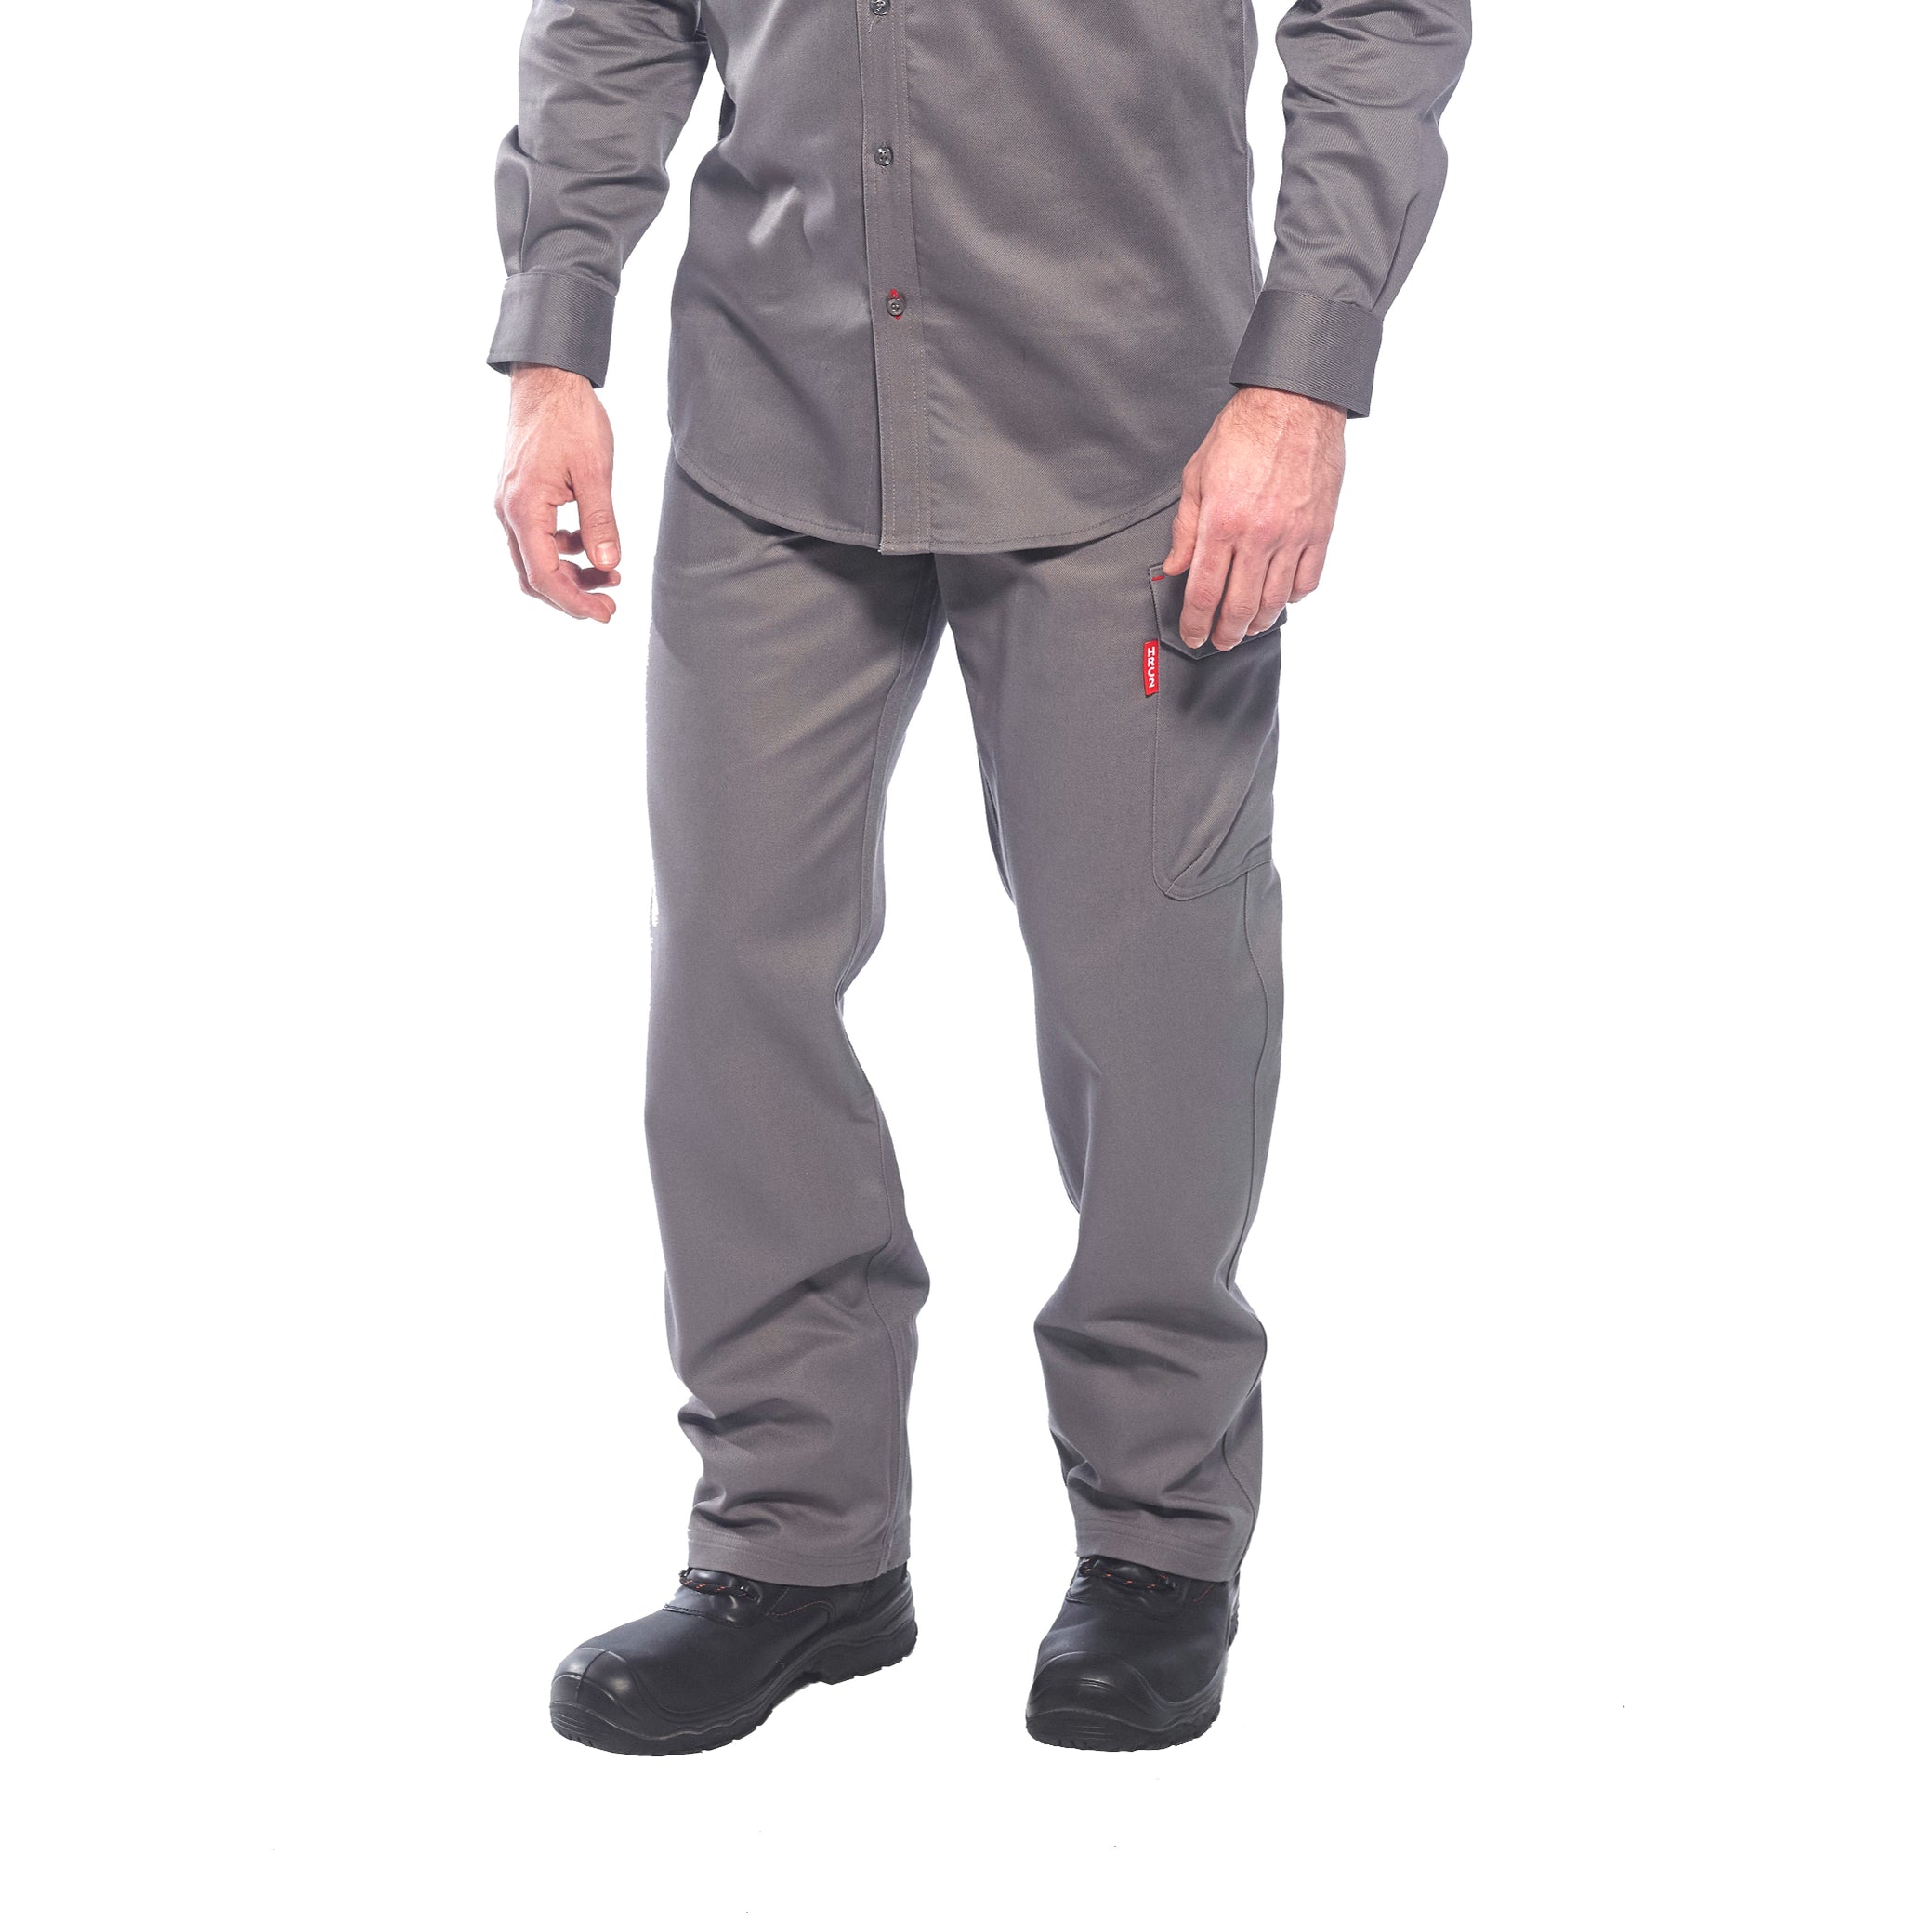 Flame Resistant Clothing | Fire Resistant Apparel | FR Workwear ...